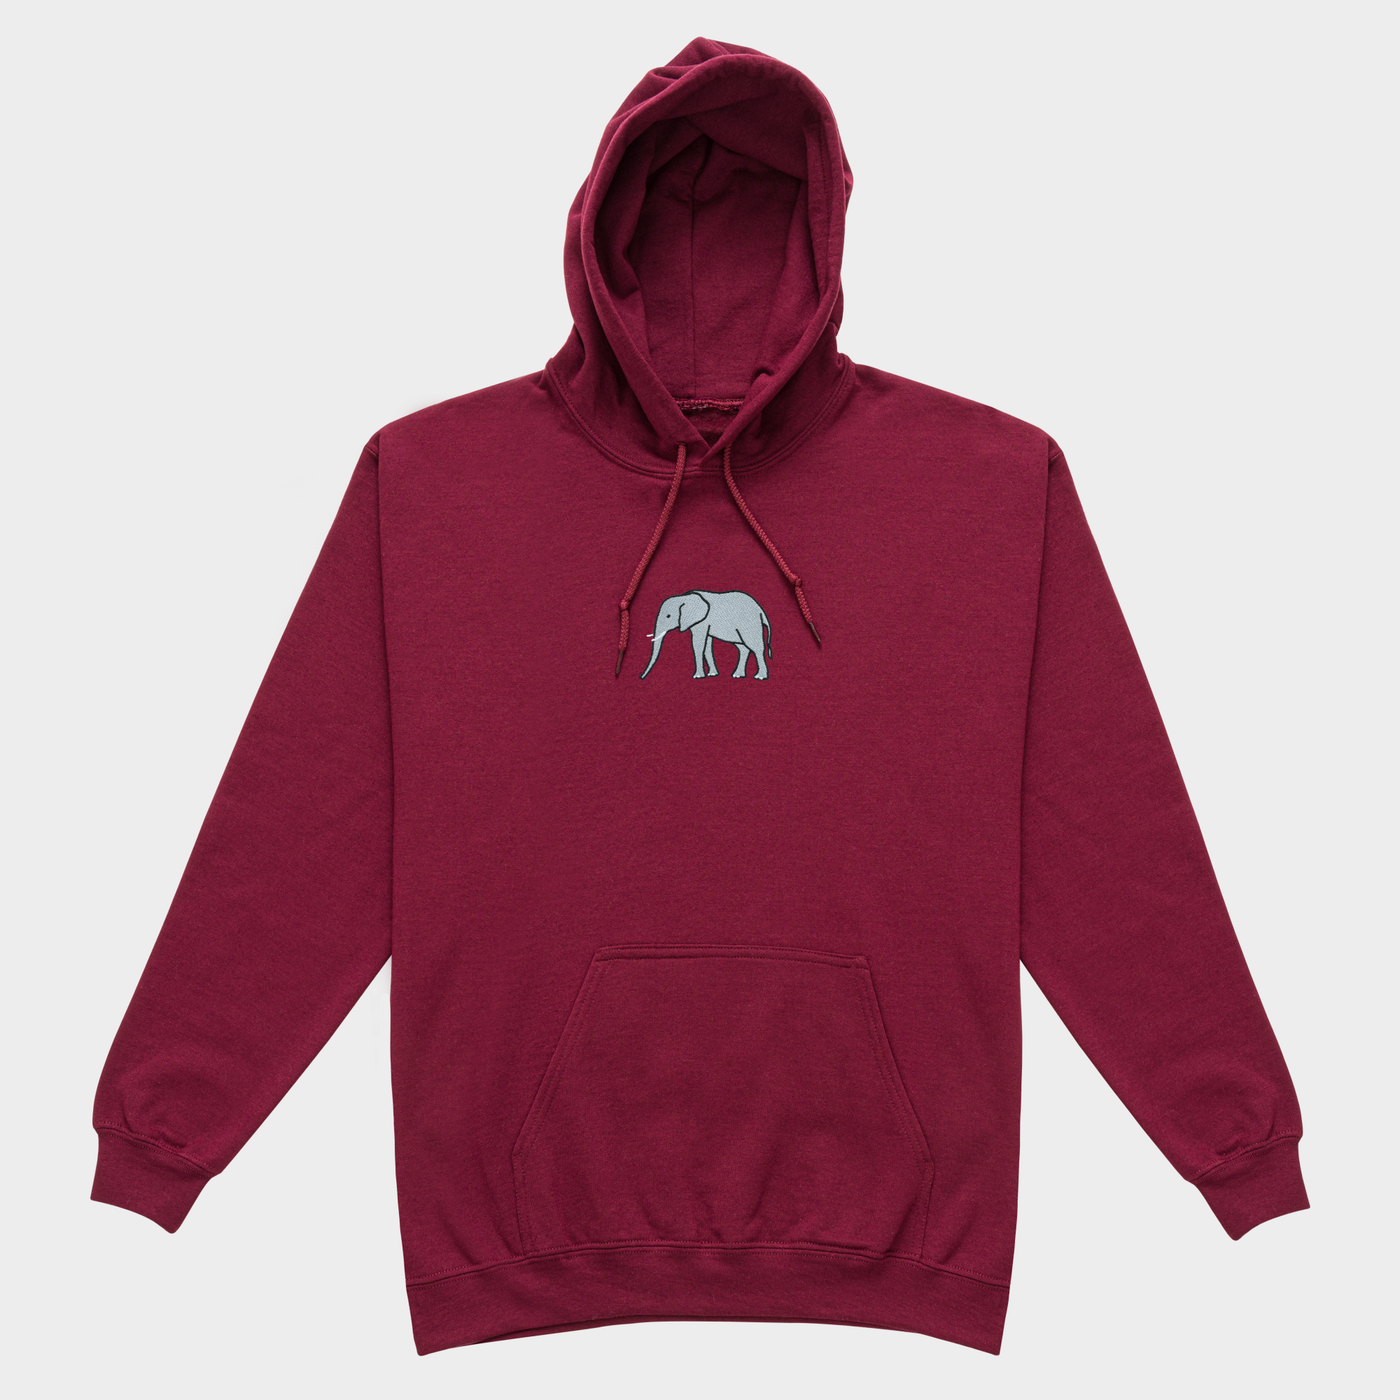 Bobby's Planet Women's Embroidered Elephant Hoodie from African Animals Collection in Maroon Color#color_maroon